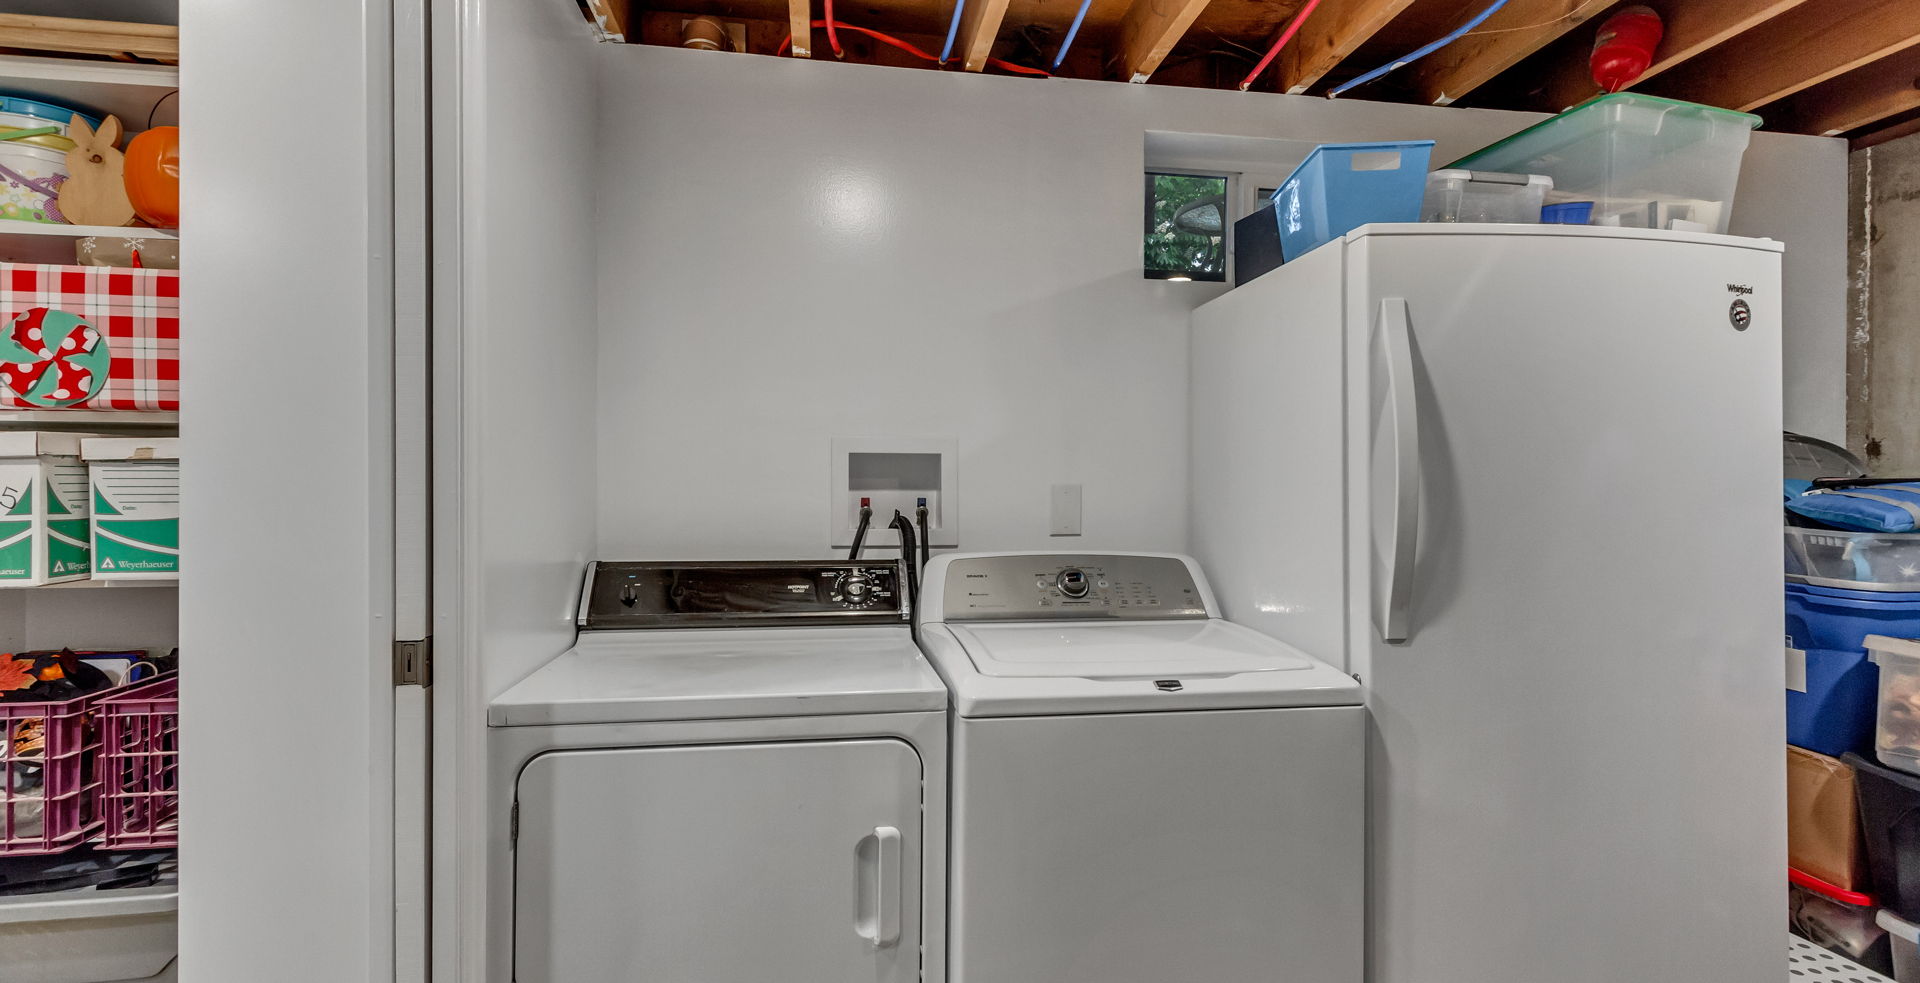 clothes washing area featuring separate washer and dryer